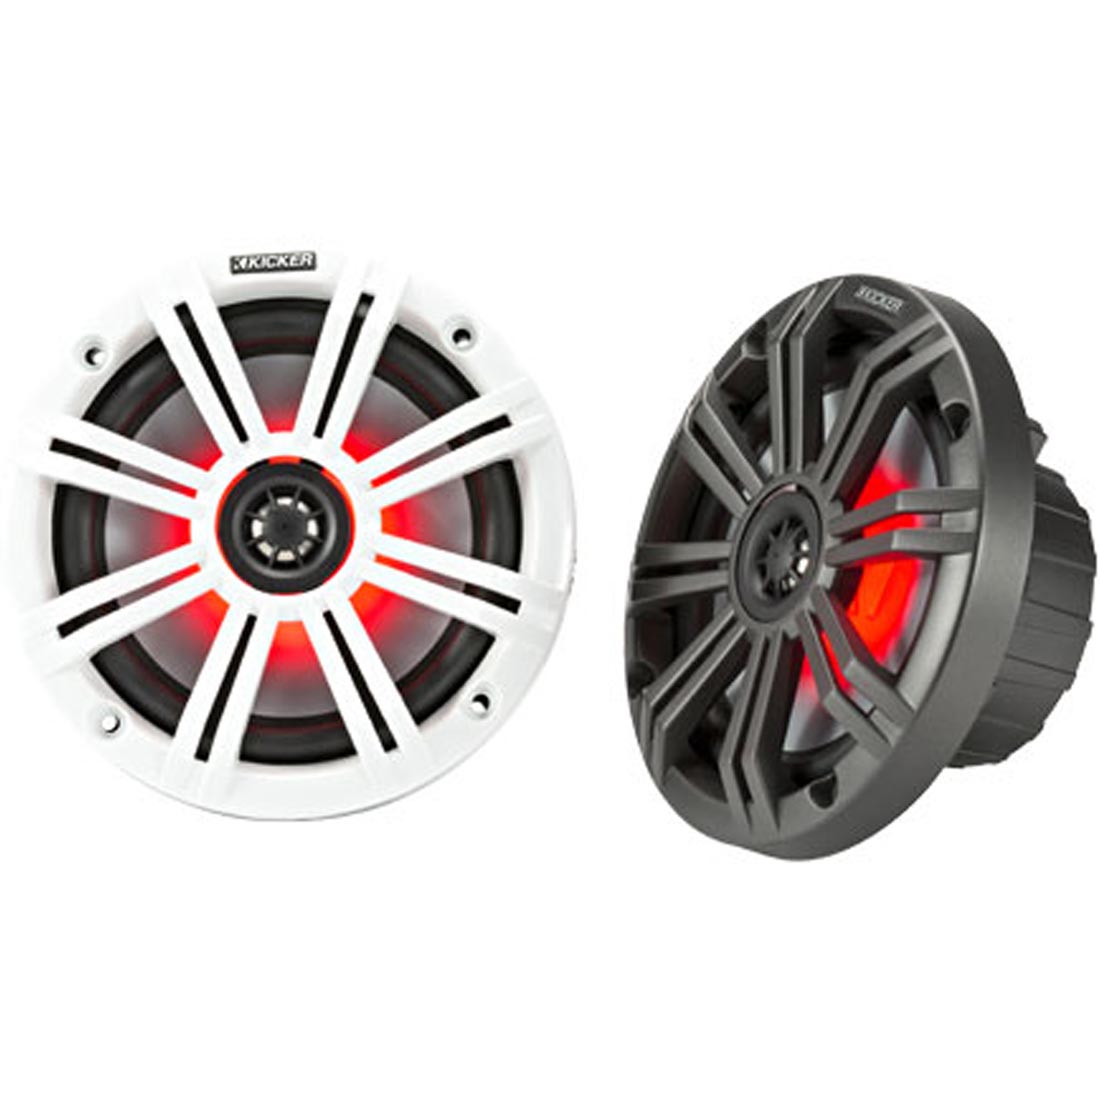 Kicker 45KM654L 6.5" 2-Way 4-Ohm Marine Coaxial Speakers with LED Lighting